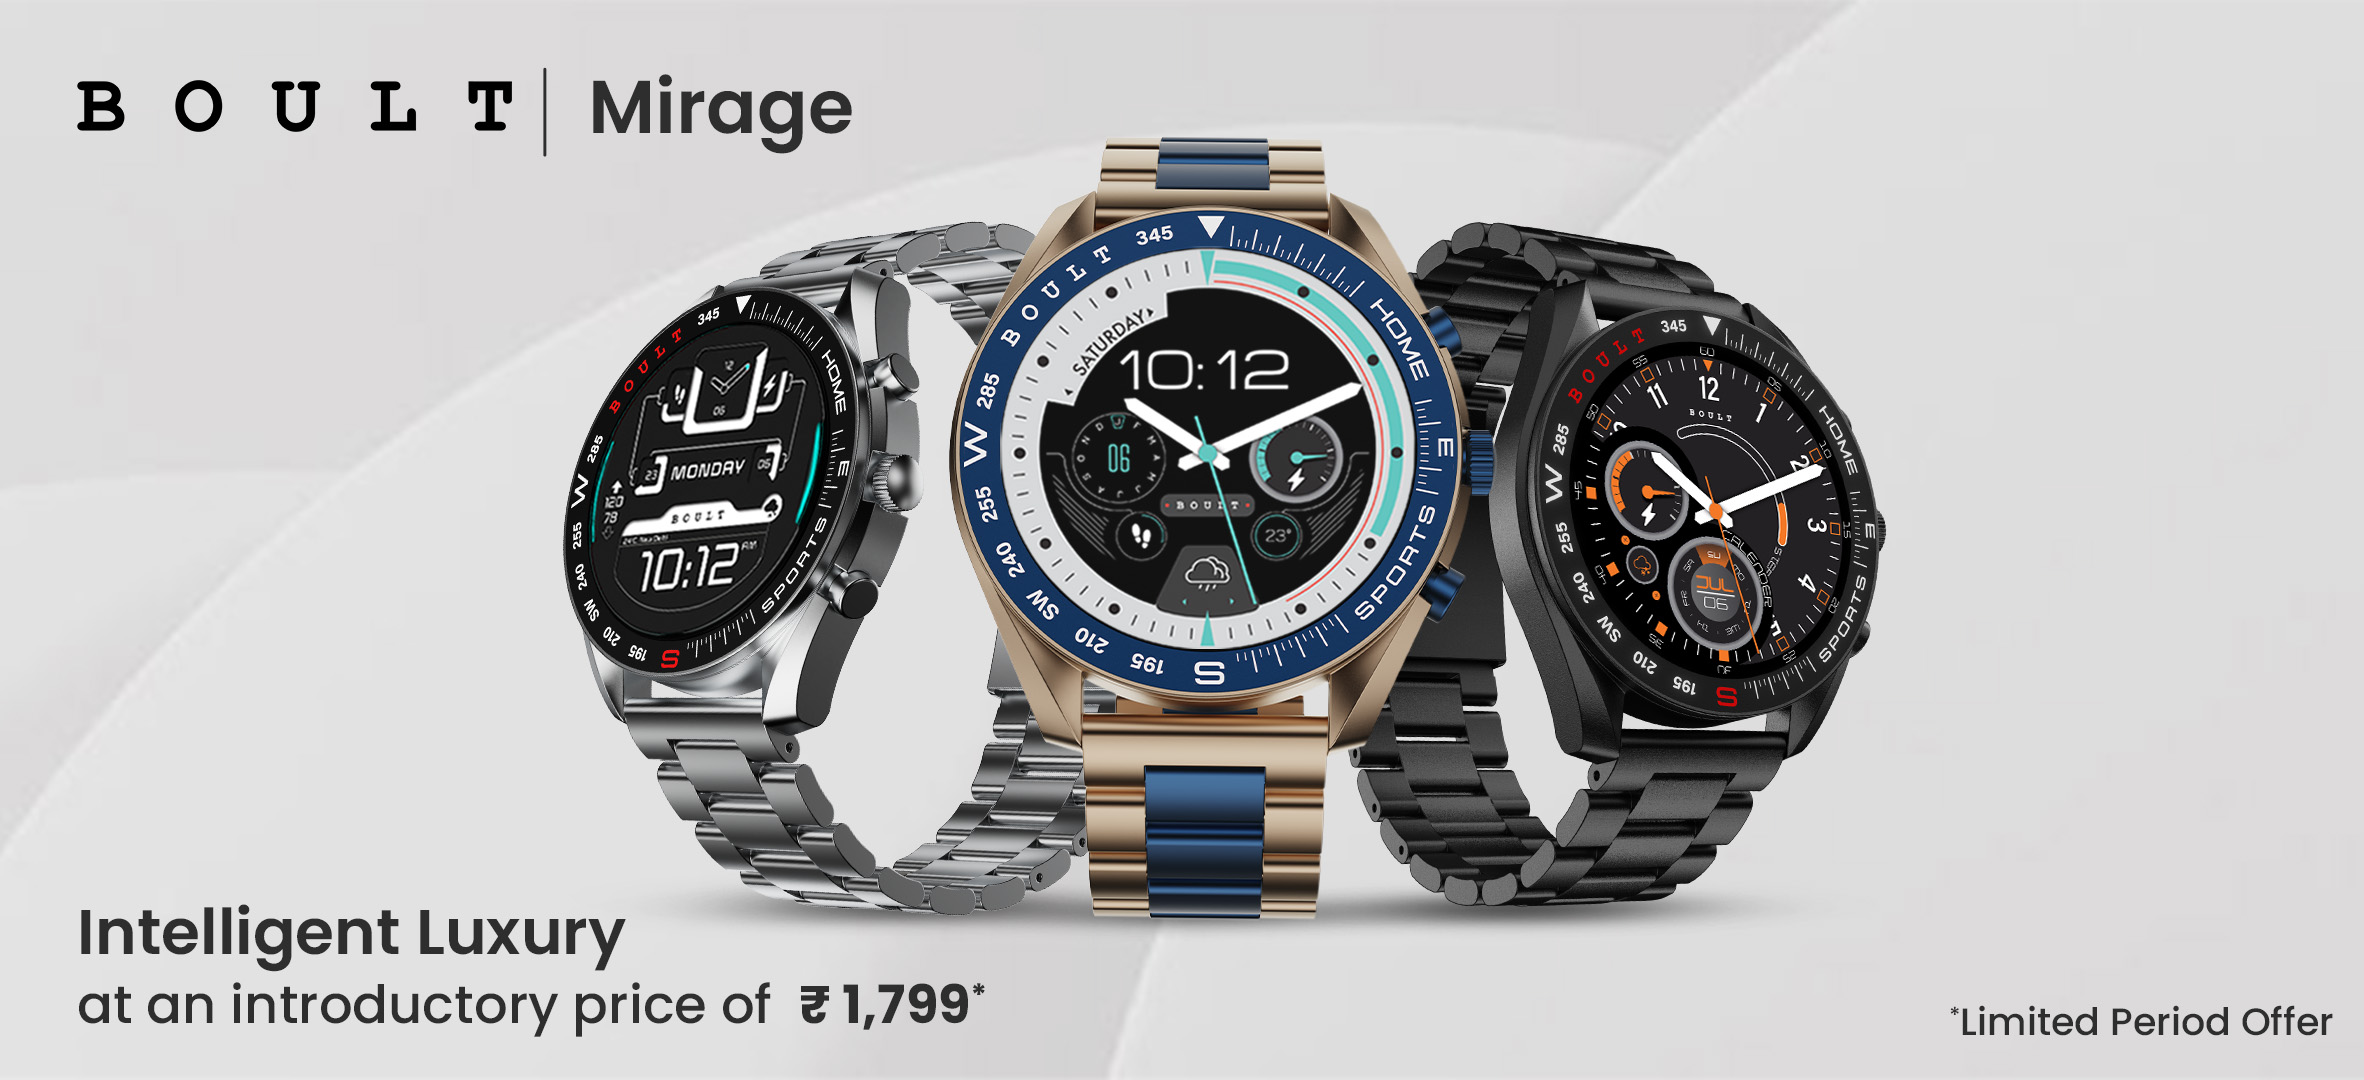 BOULT Mirage: The New Competitor in India’s Smartwatch Market